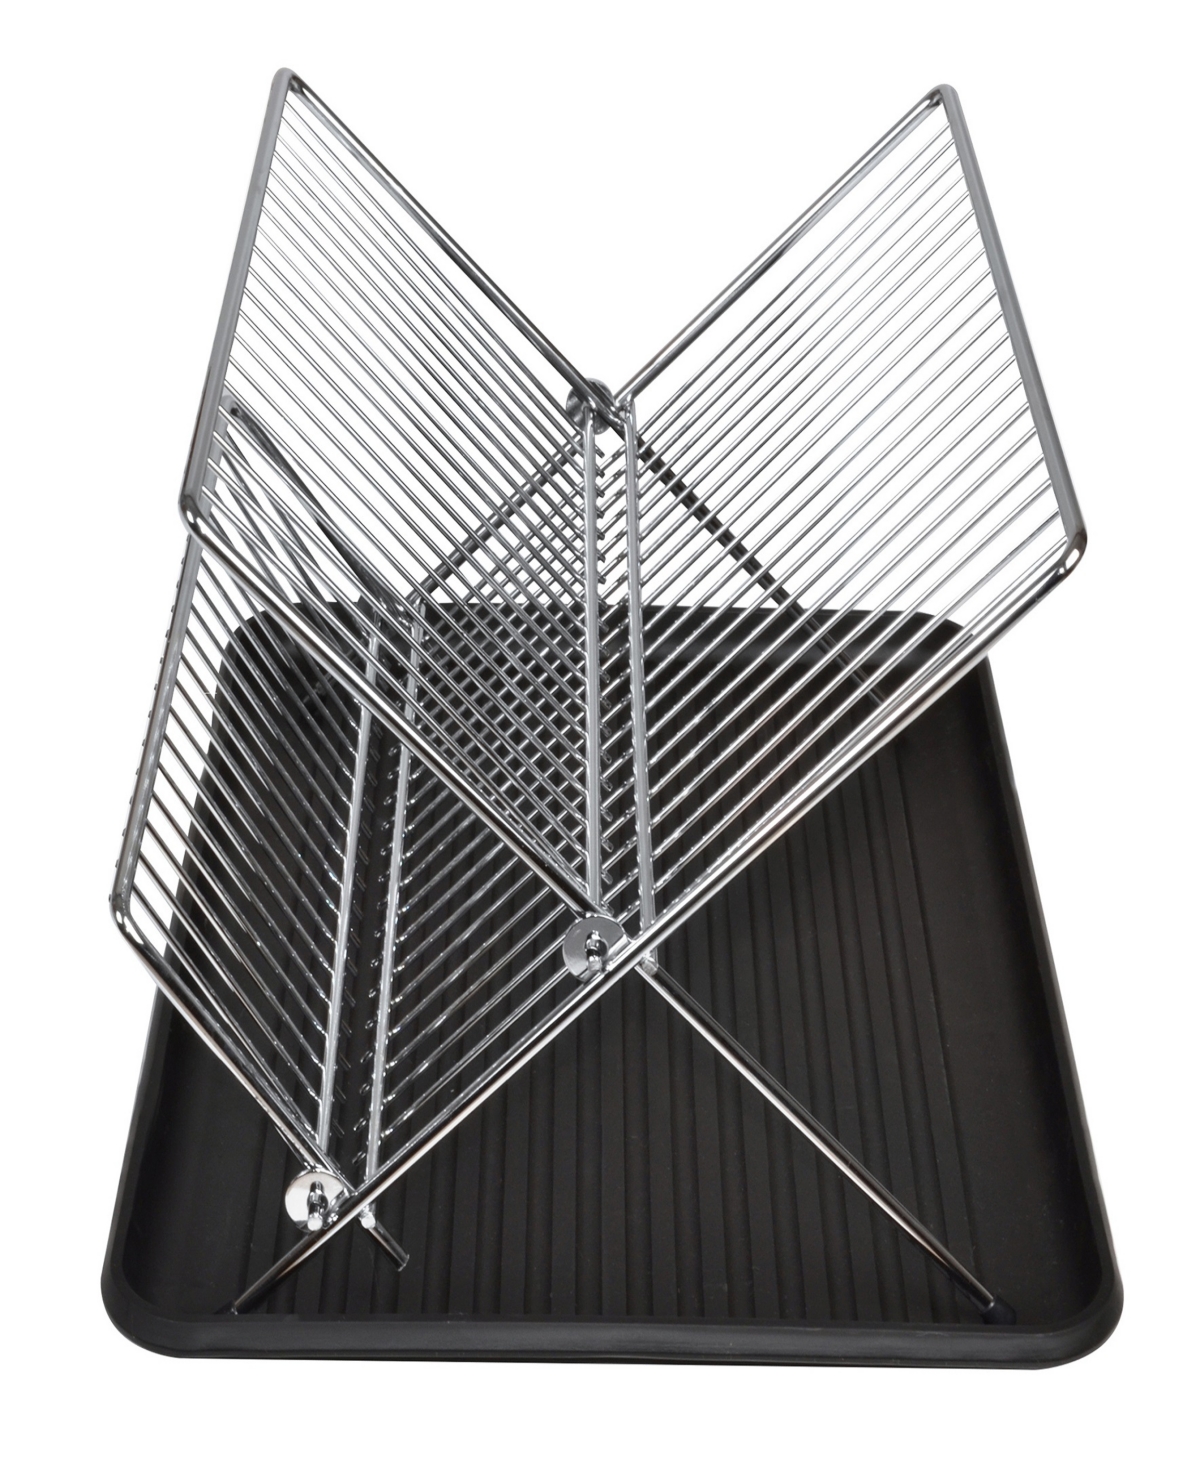 Smart Design Dish Drainer Rack With In Sink Or Counter Drying In Chrome